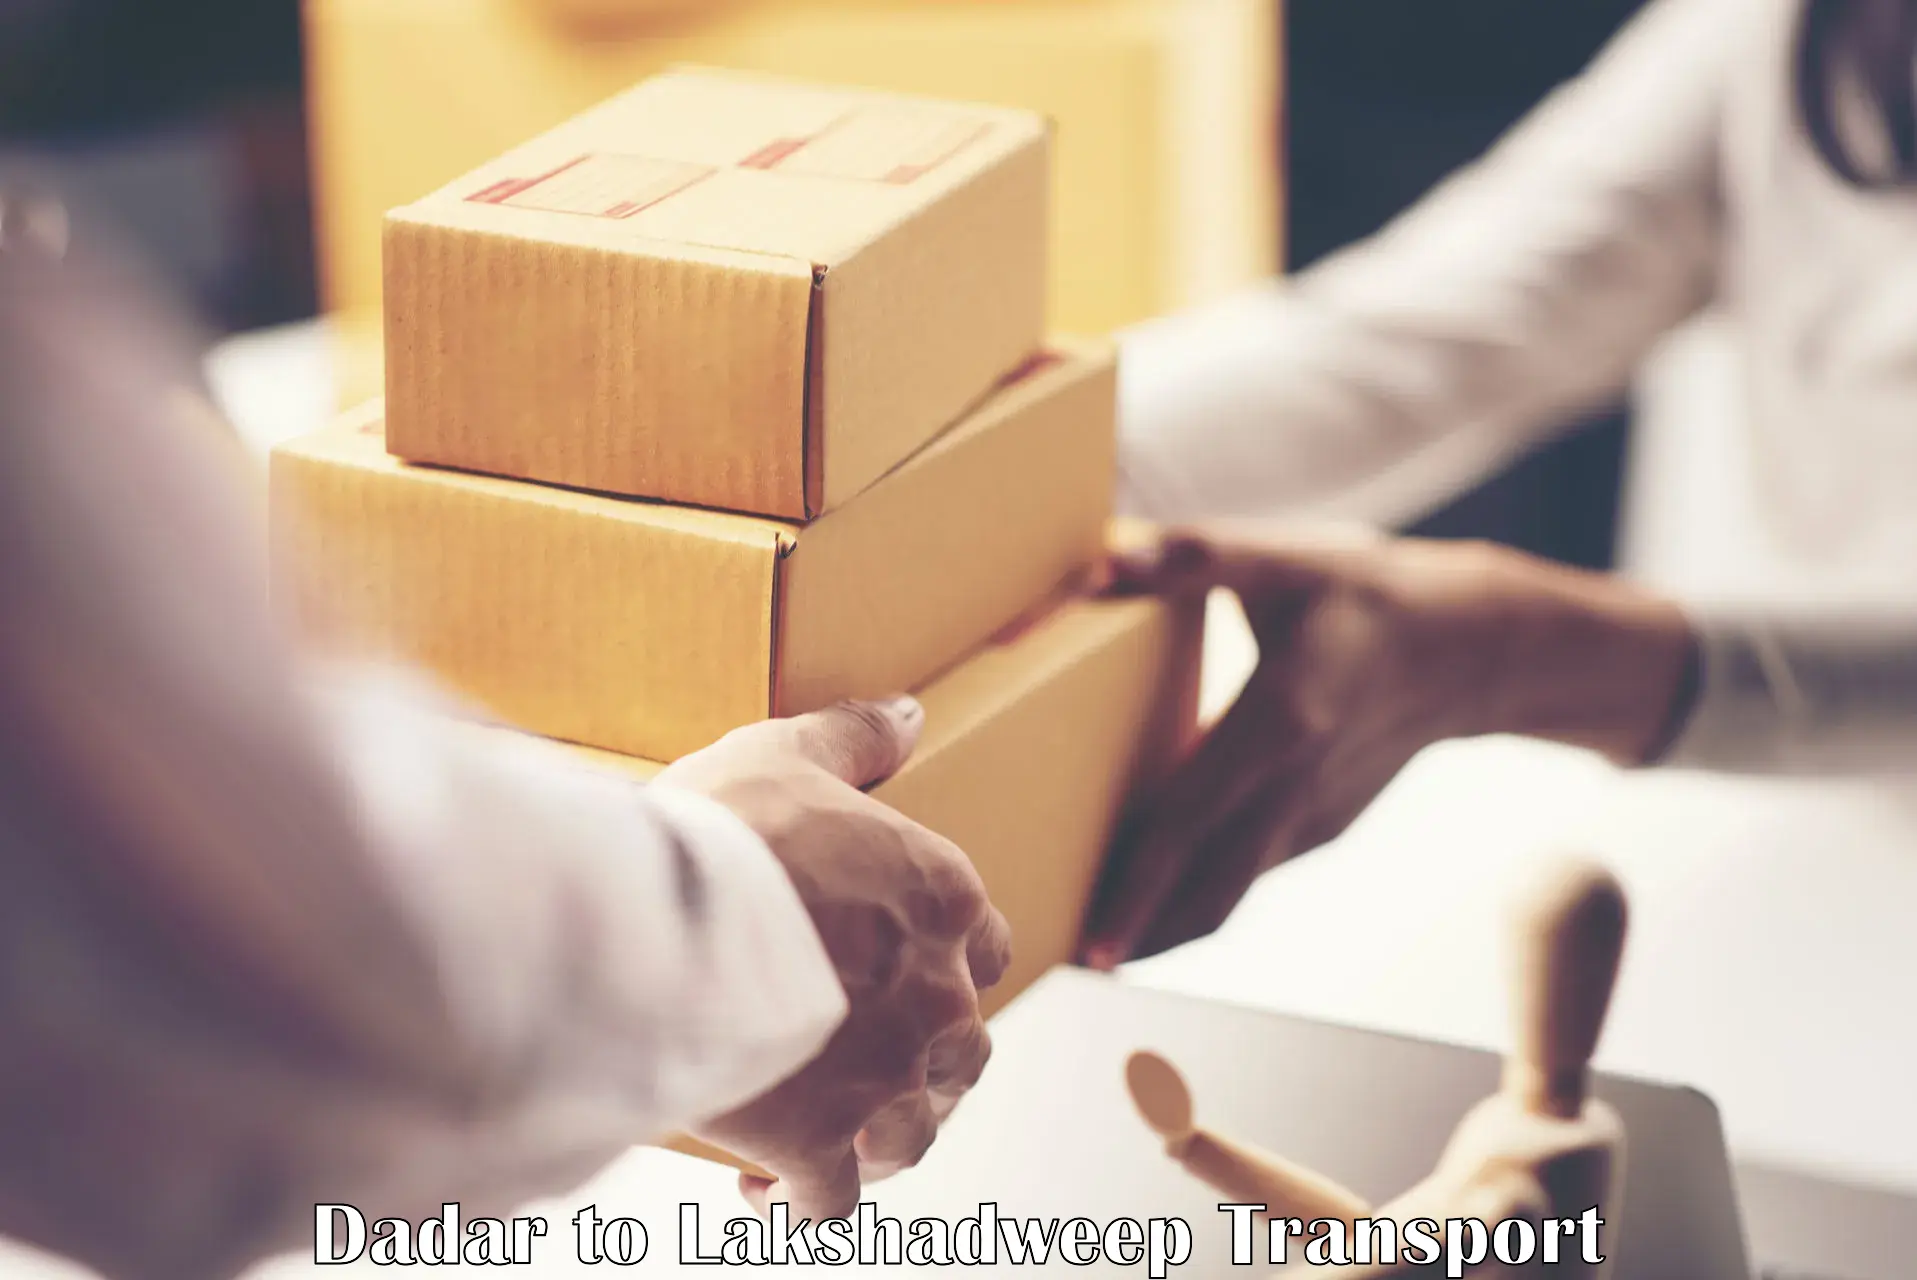 Commercial transport service Dadar to Lakshadweep